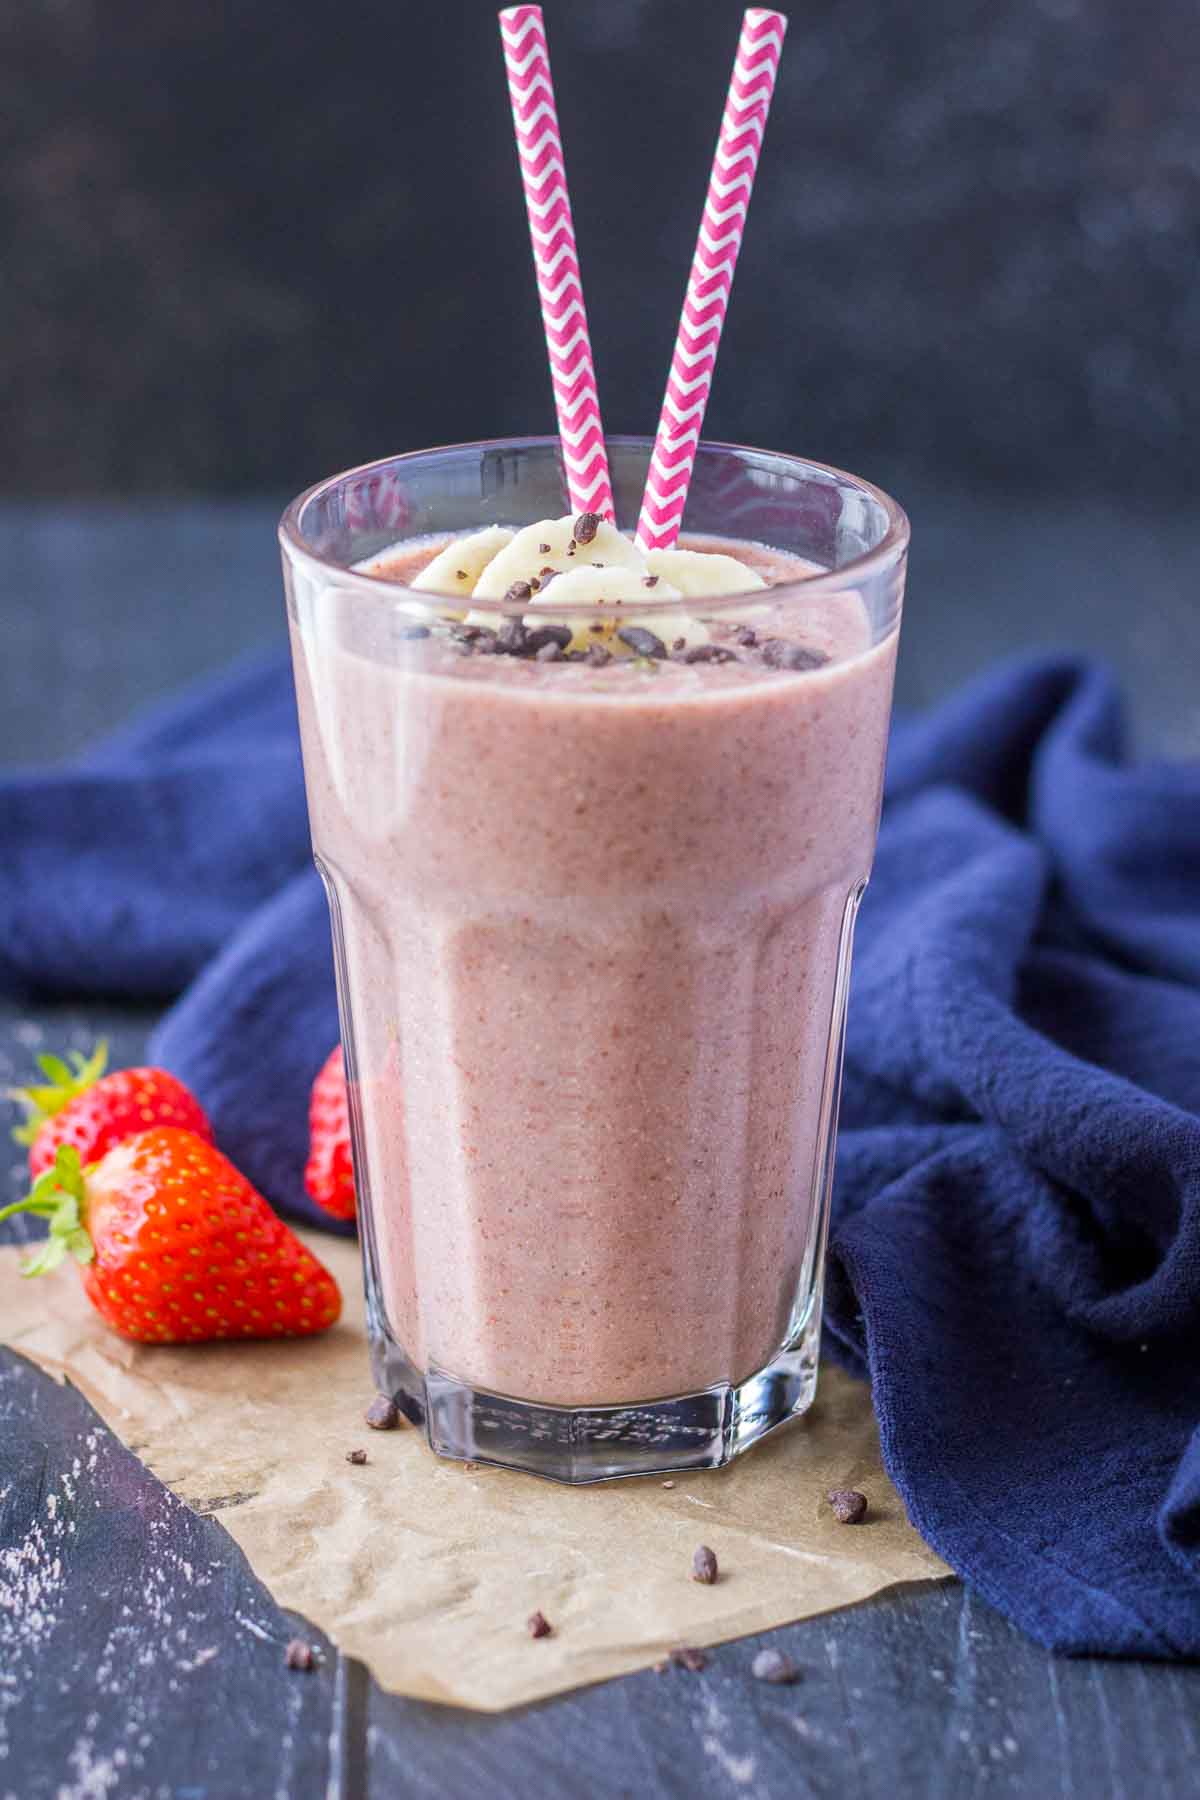 Strawberry Banana Smoothie served in a glass toped with banana slices and chocolate